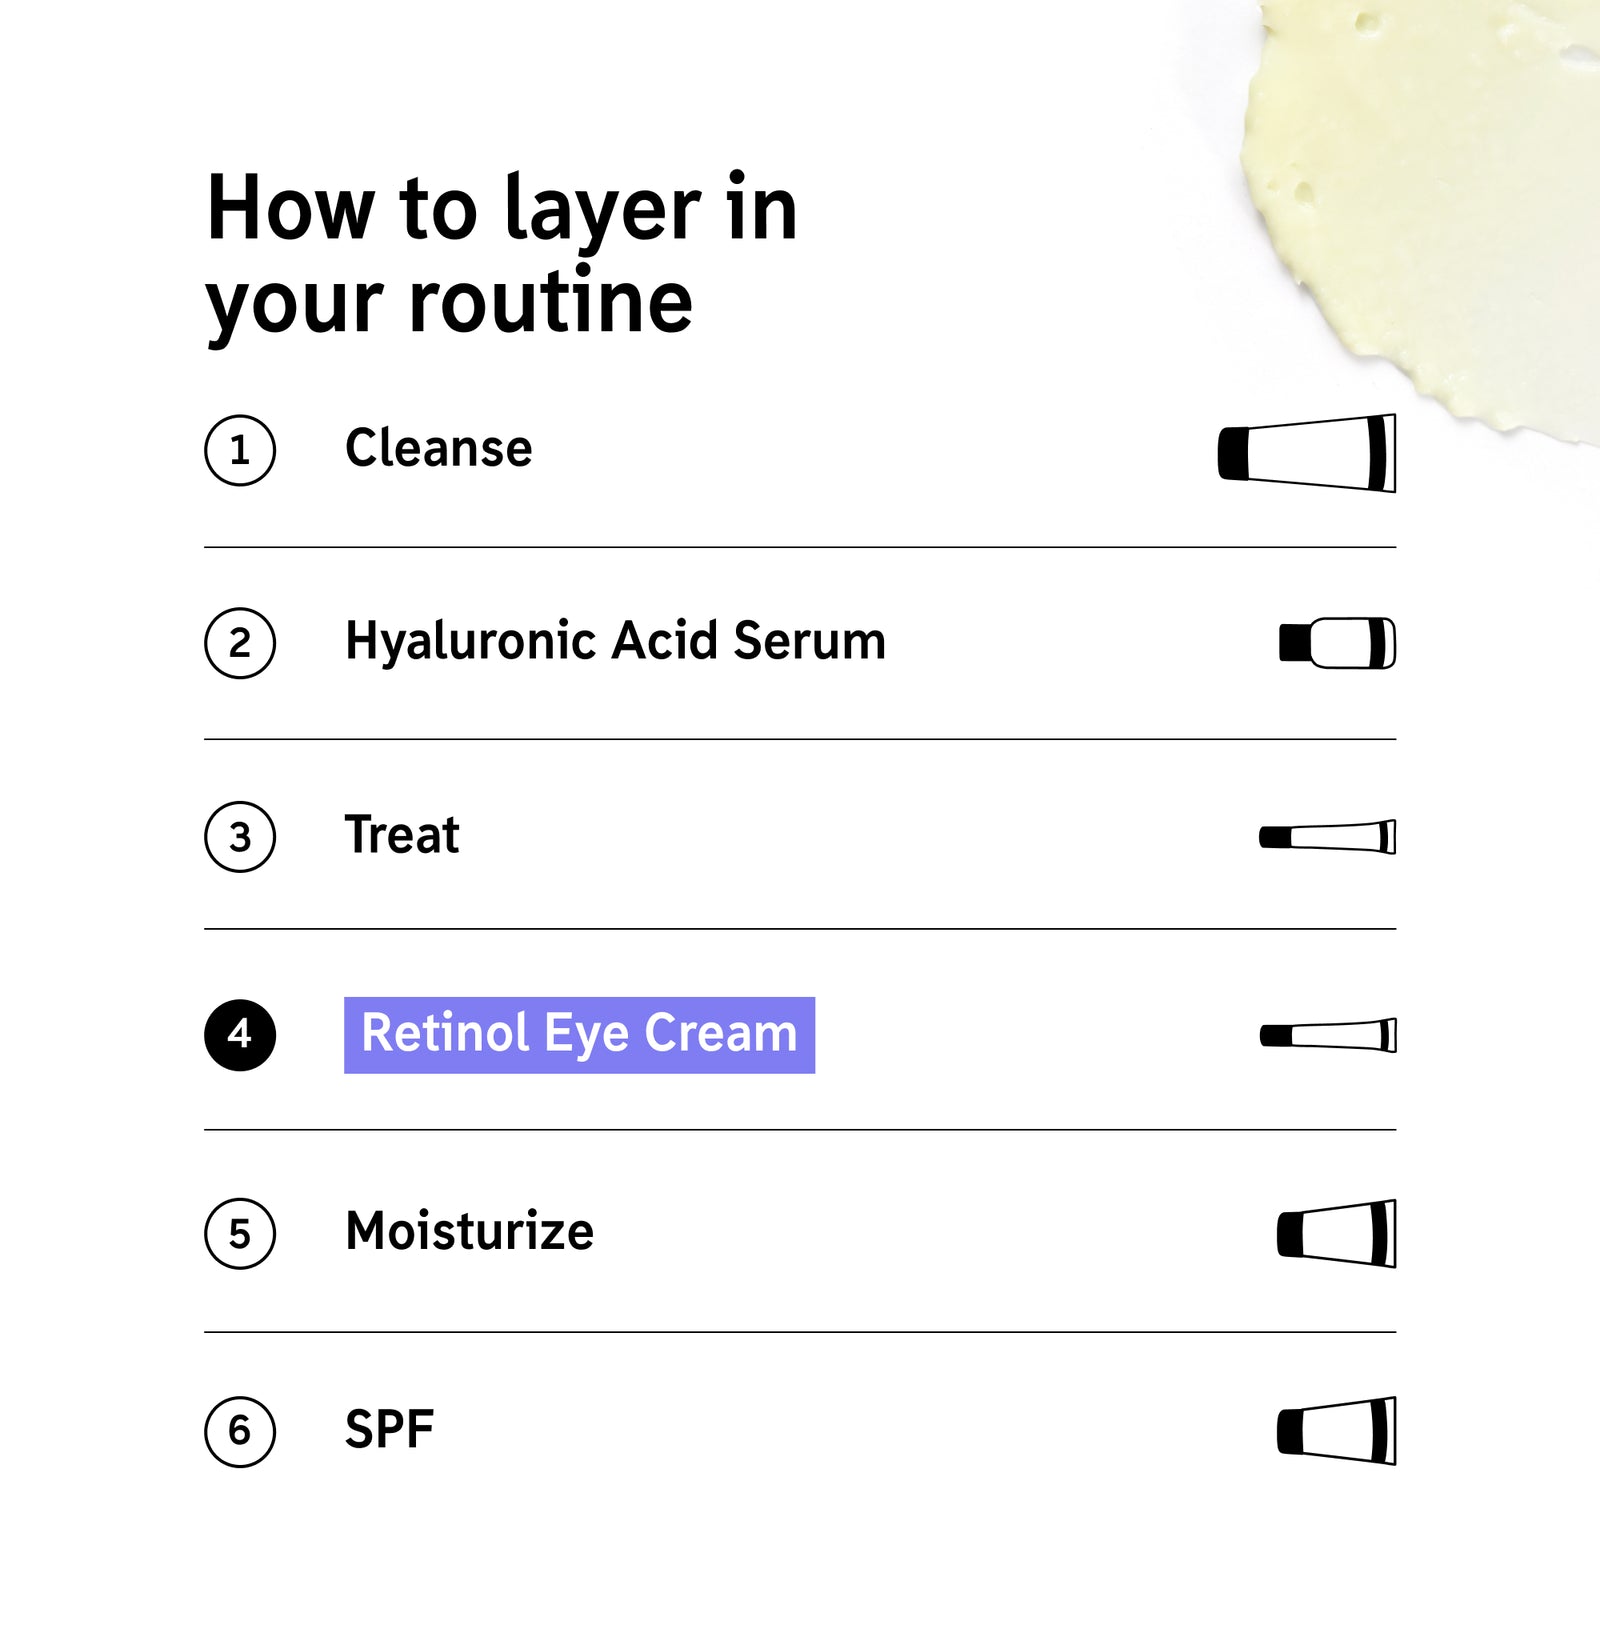 How to layer Retinol Eye Cream in your routine